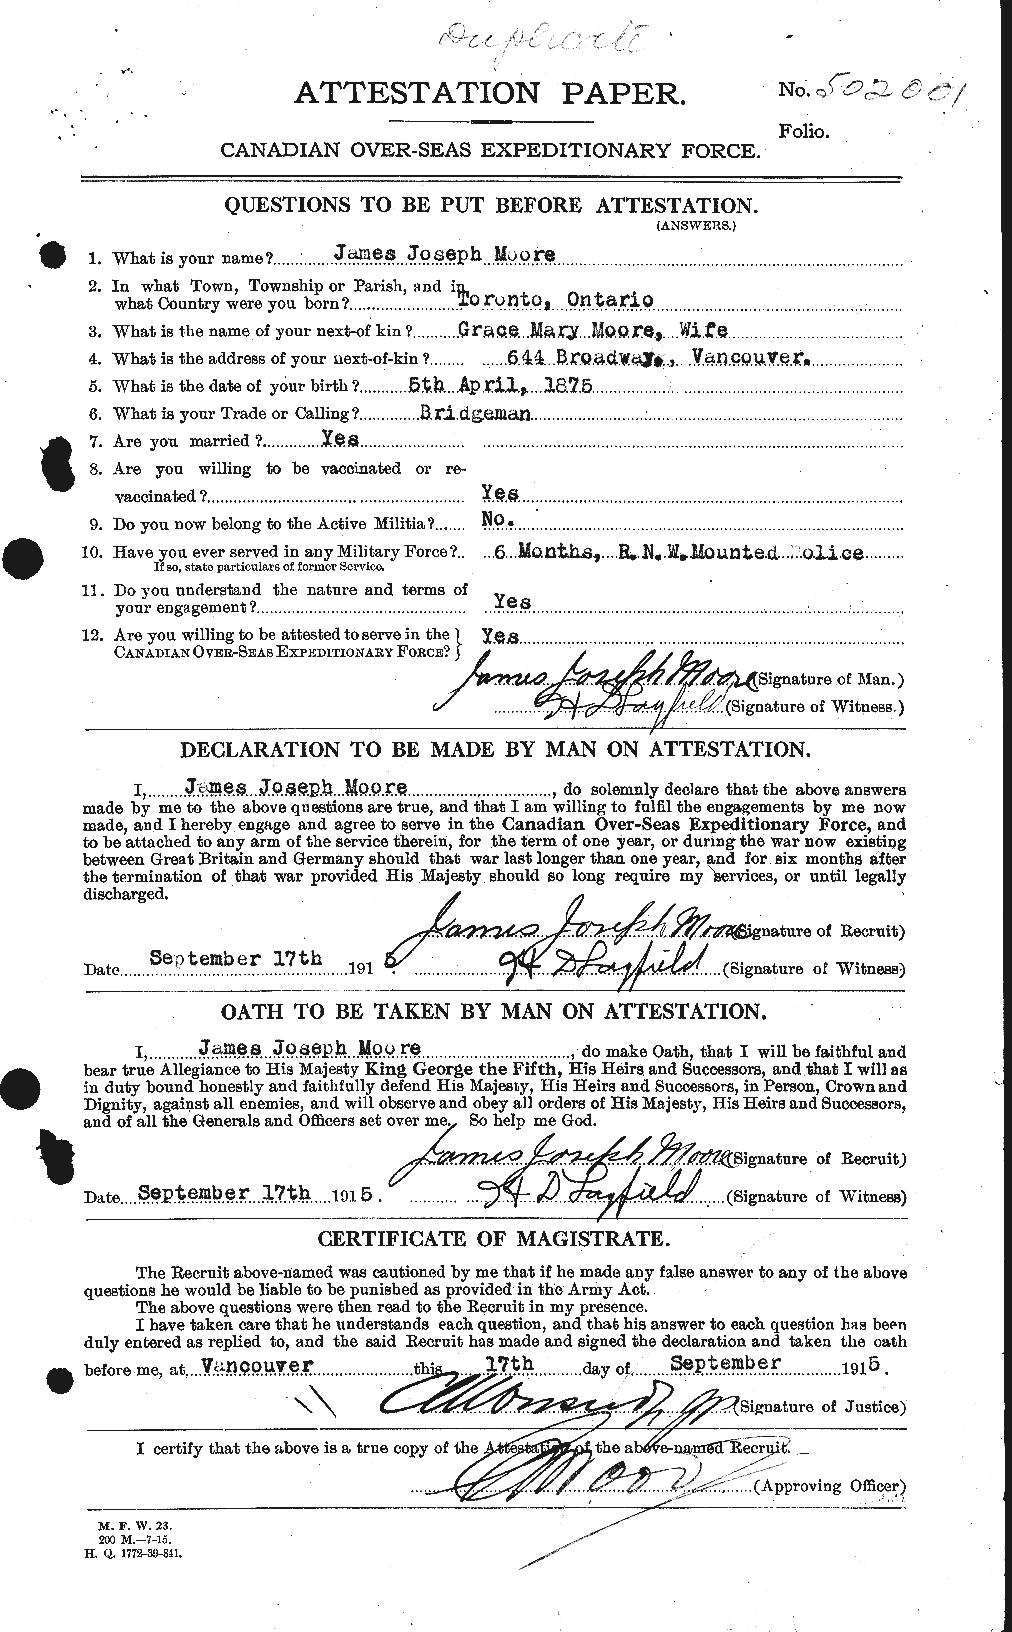 Personnel Records of the First World War - CEF 502228a